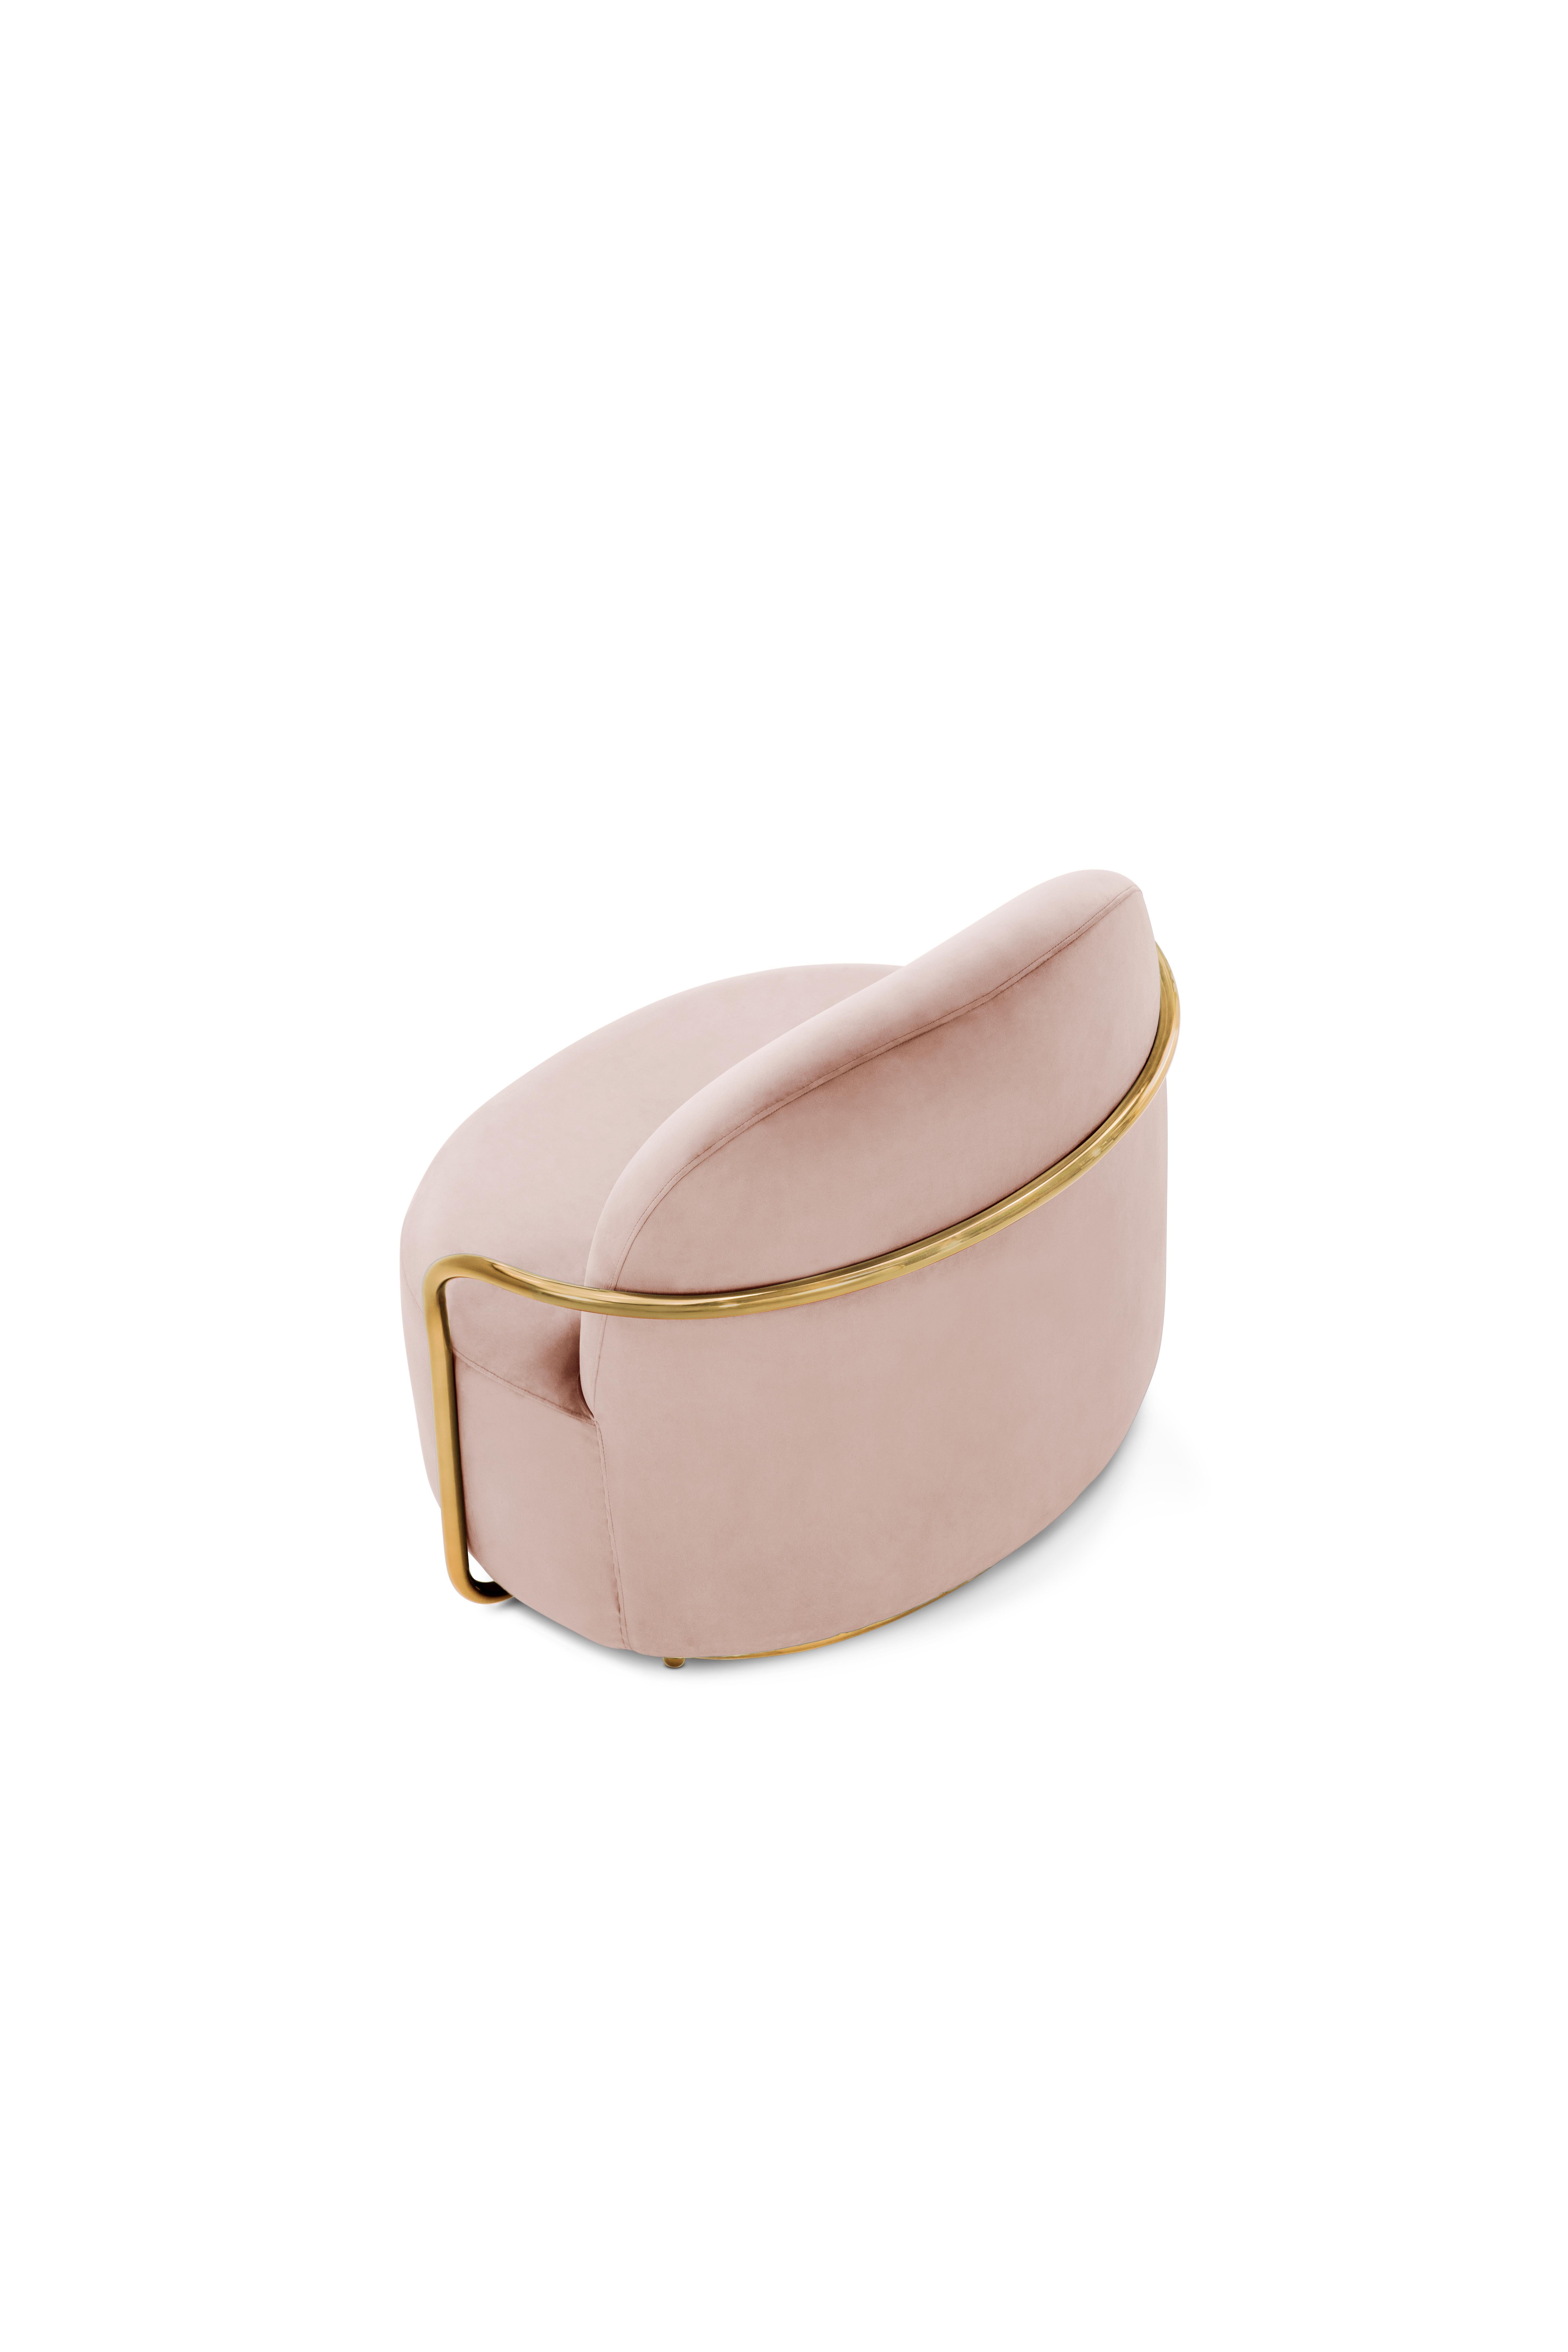 Modern Orion Lounge Chair with Plush Pink Velvet and Gold Arms by Nika Zupanc For Sale